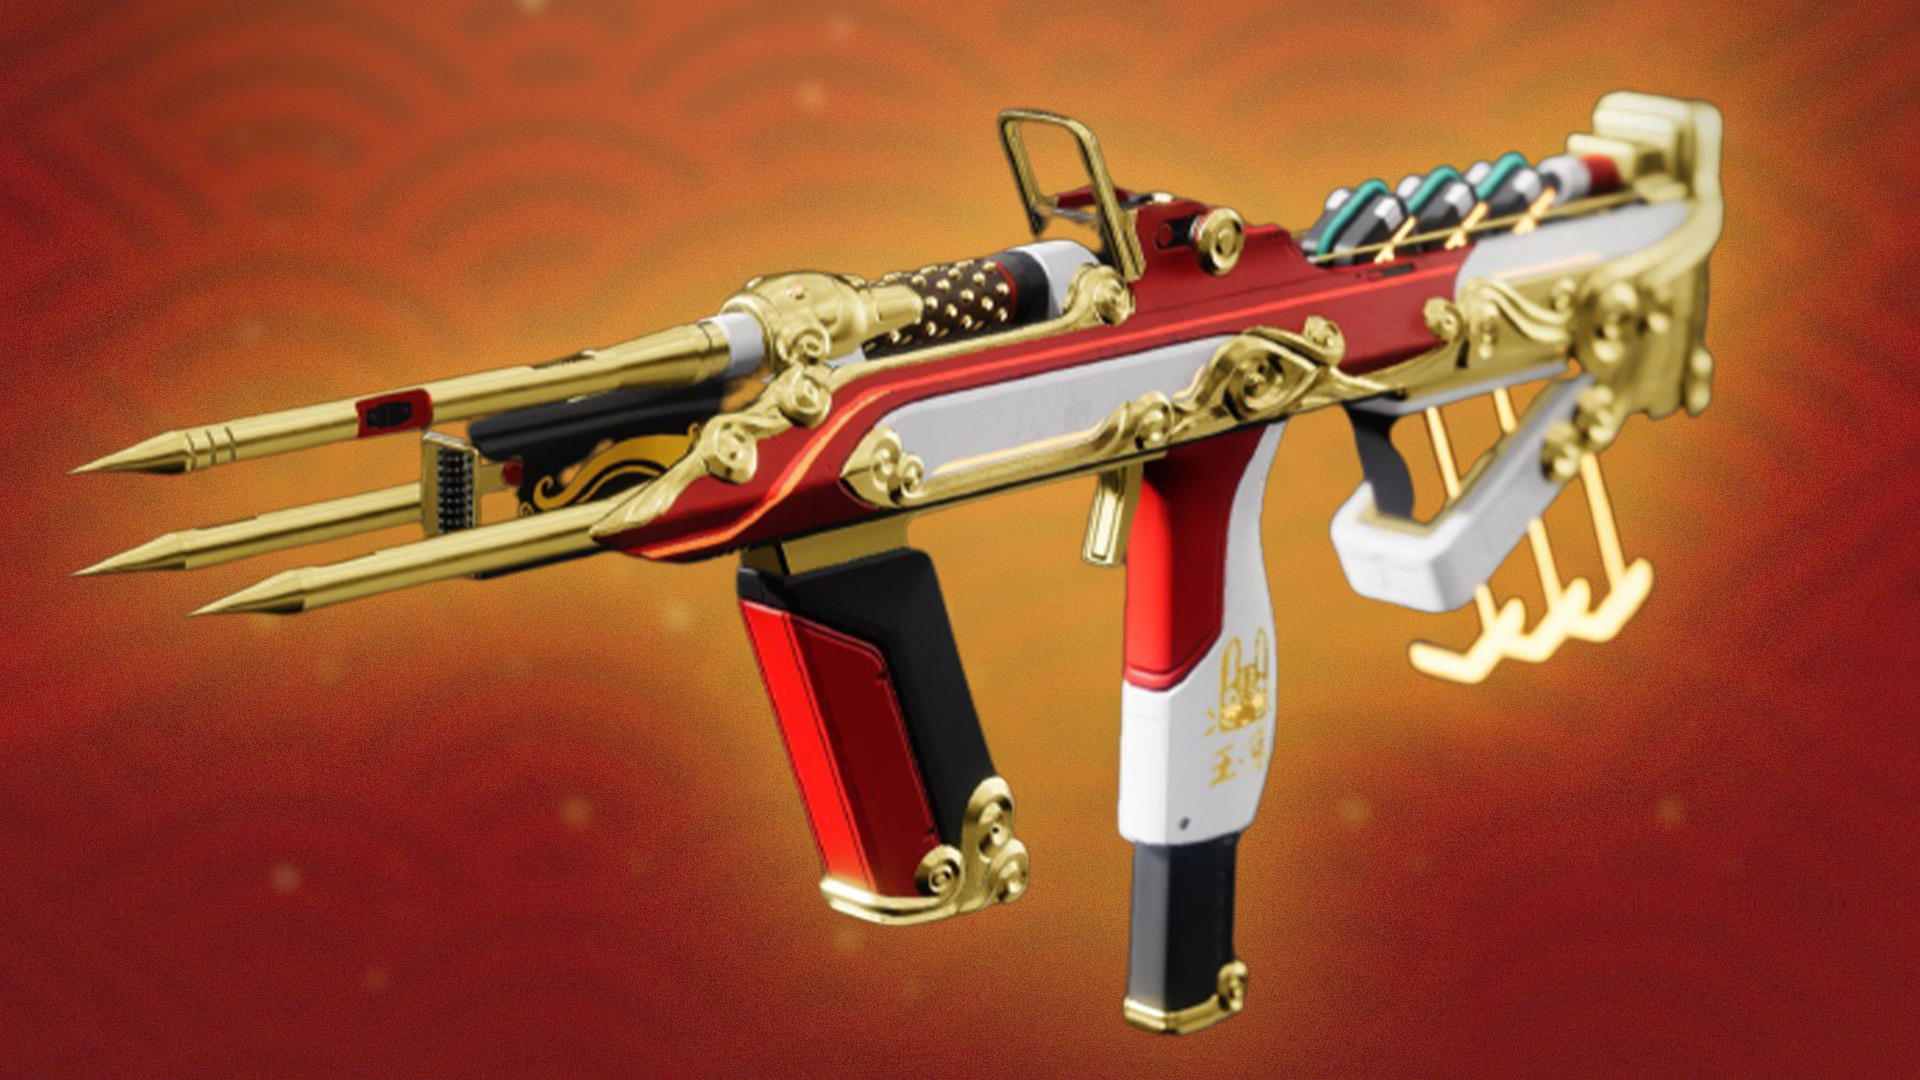 Destiny 2 free Bright Dust and new cosmetics celebrate Lunar New Year